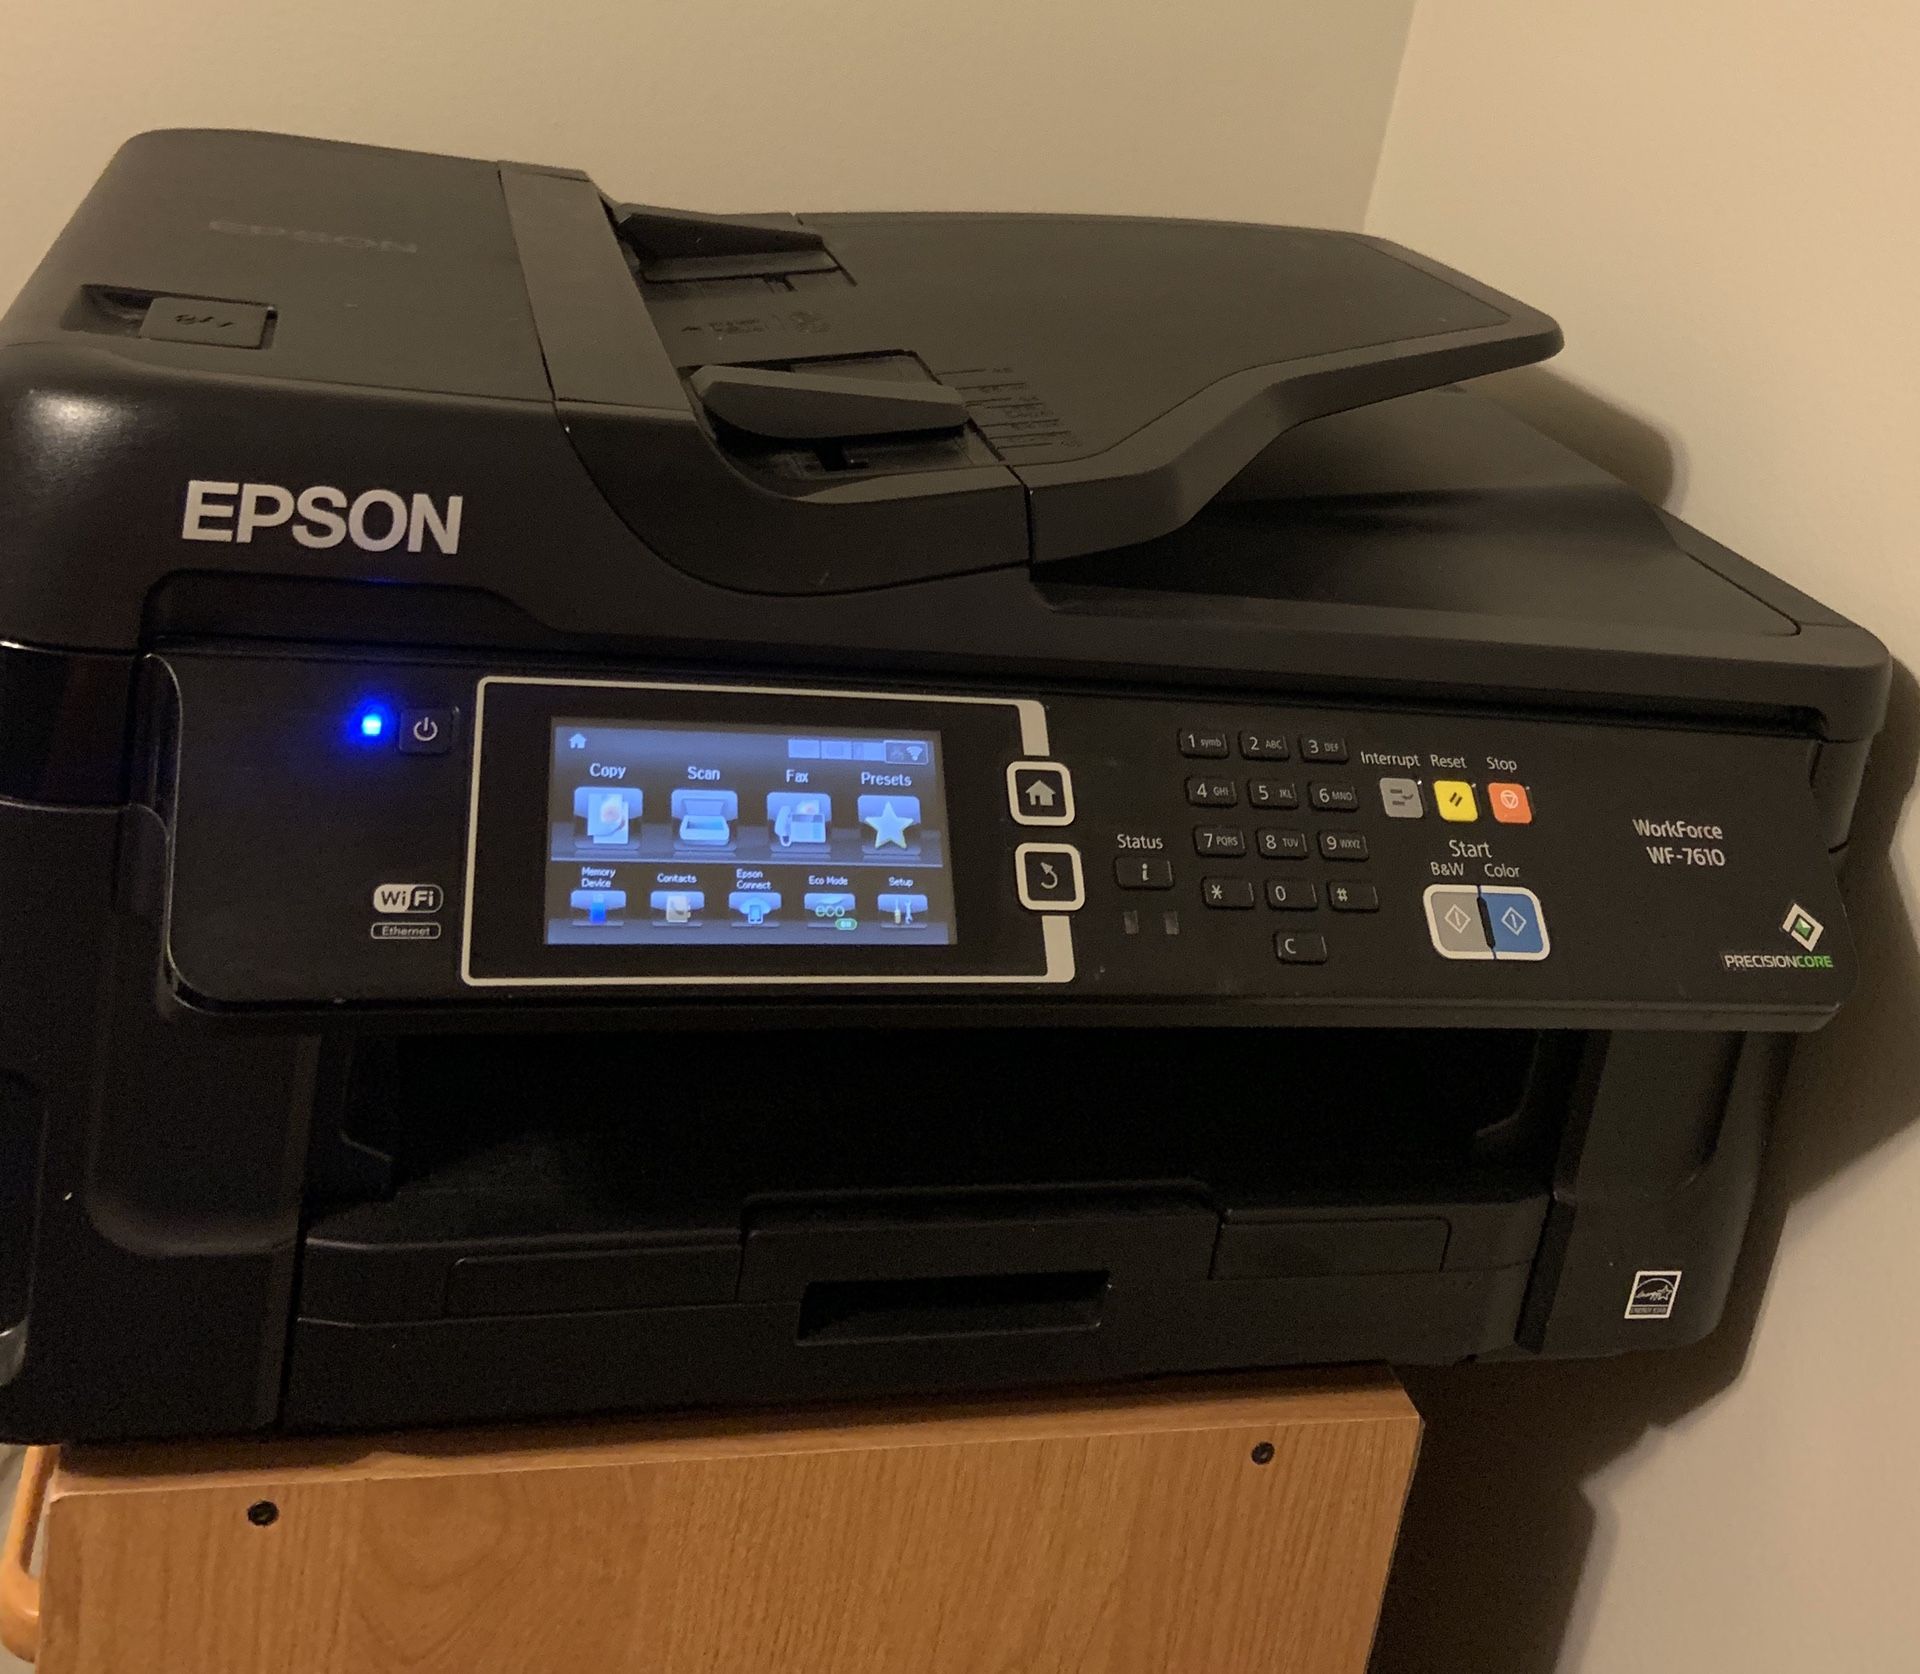 Epson WF7610 All-In-One Color Printer